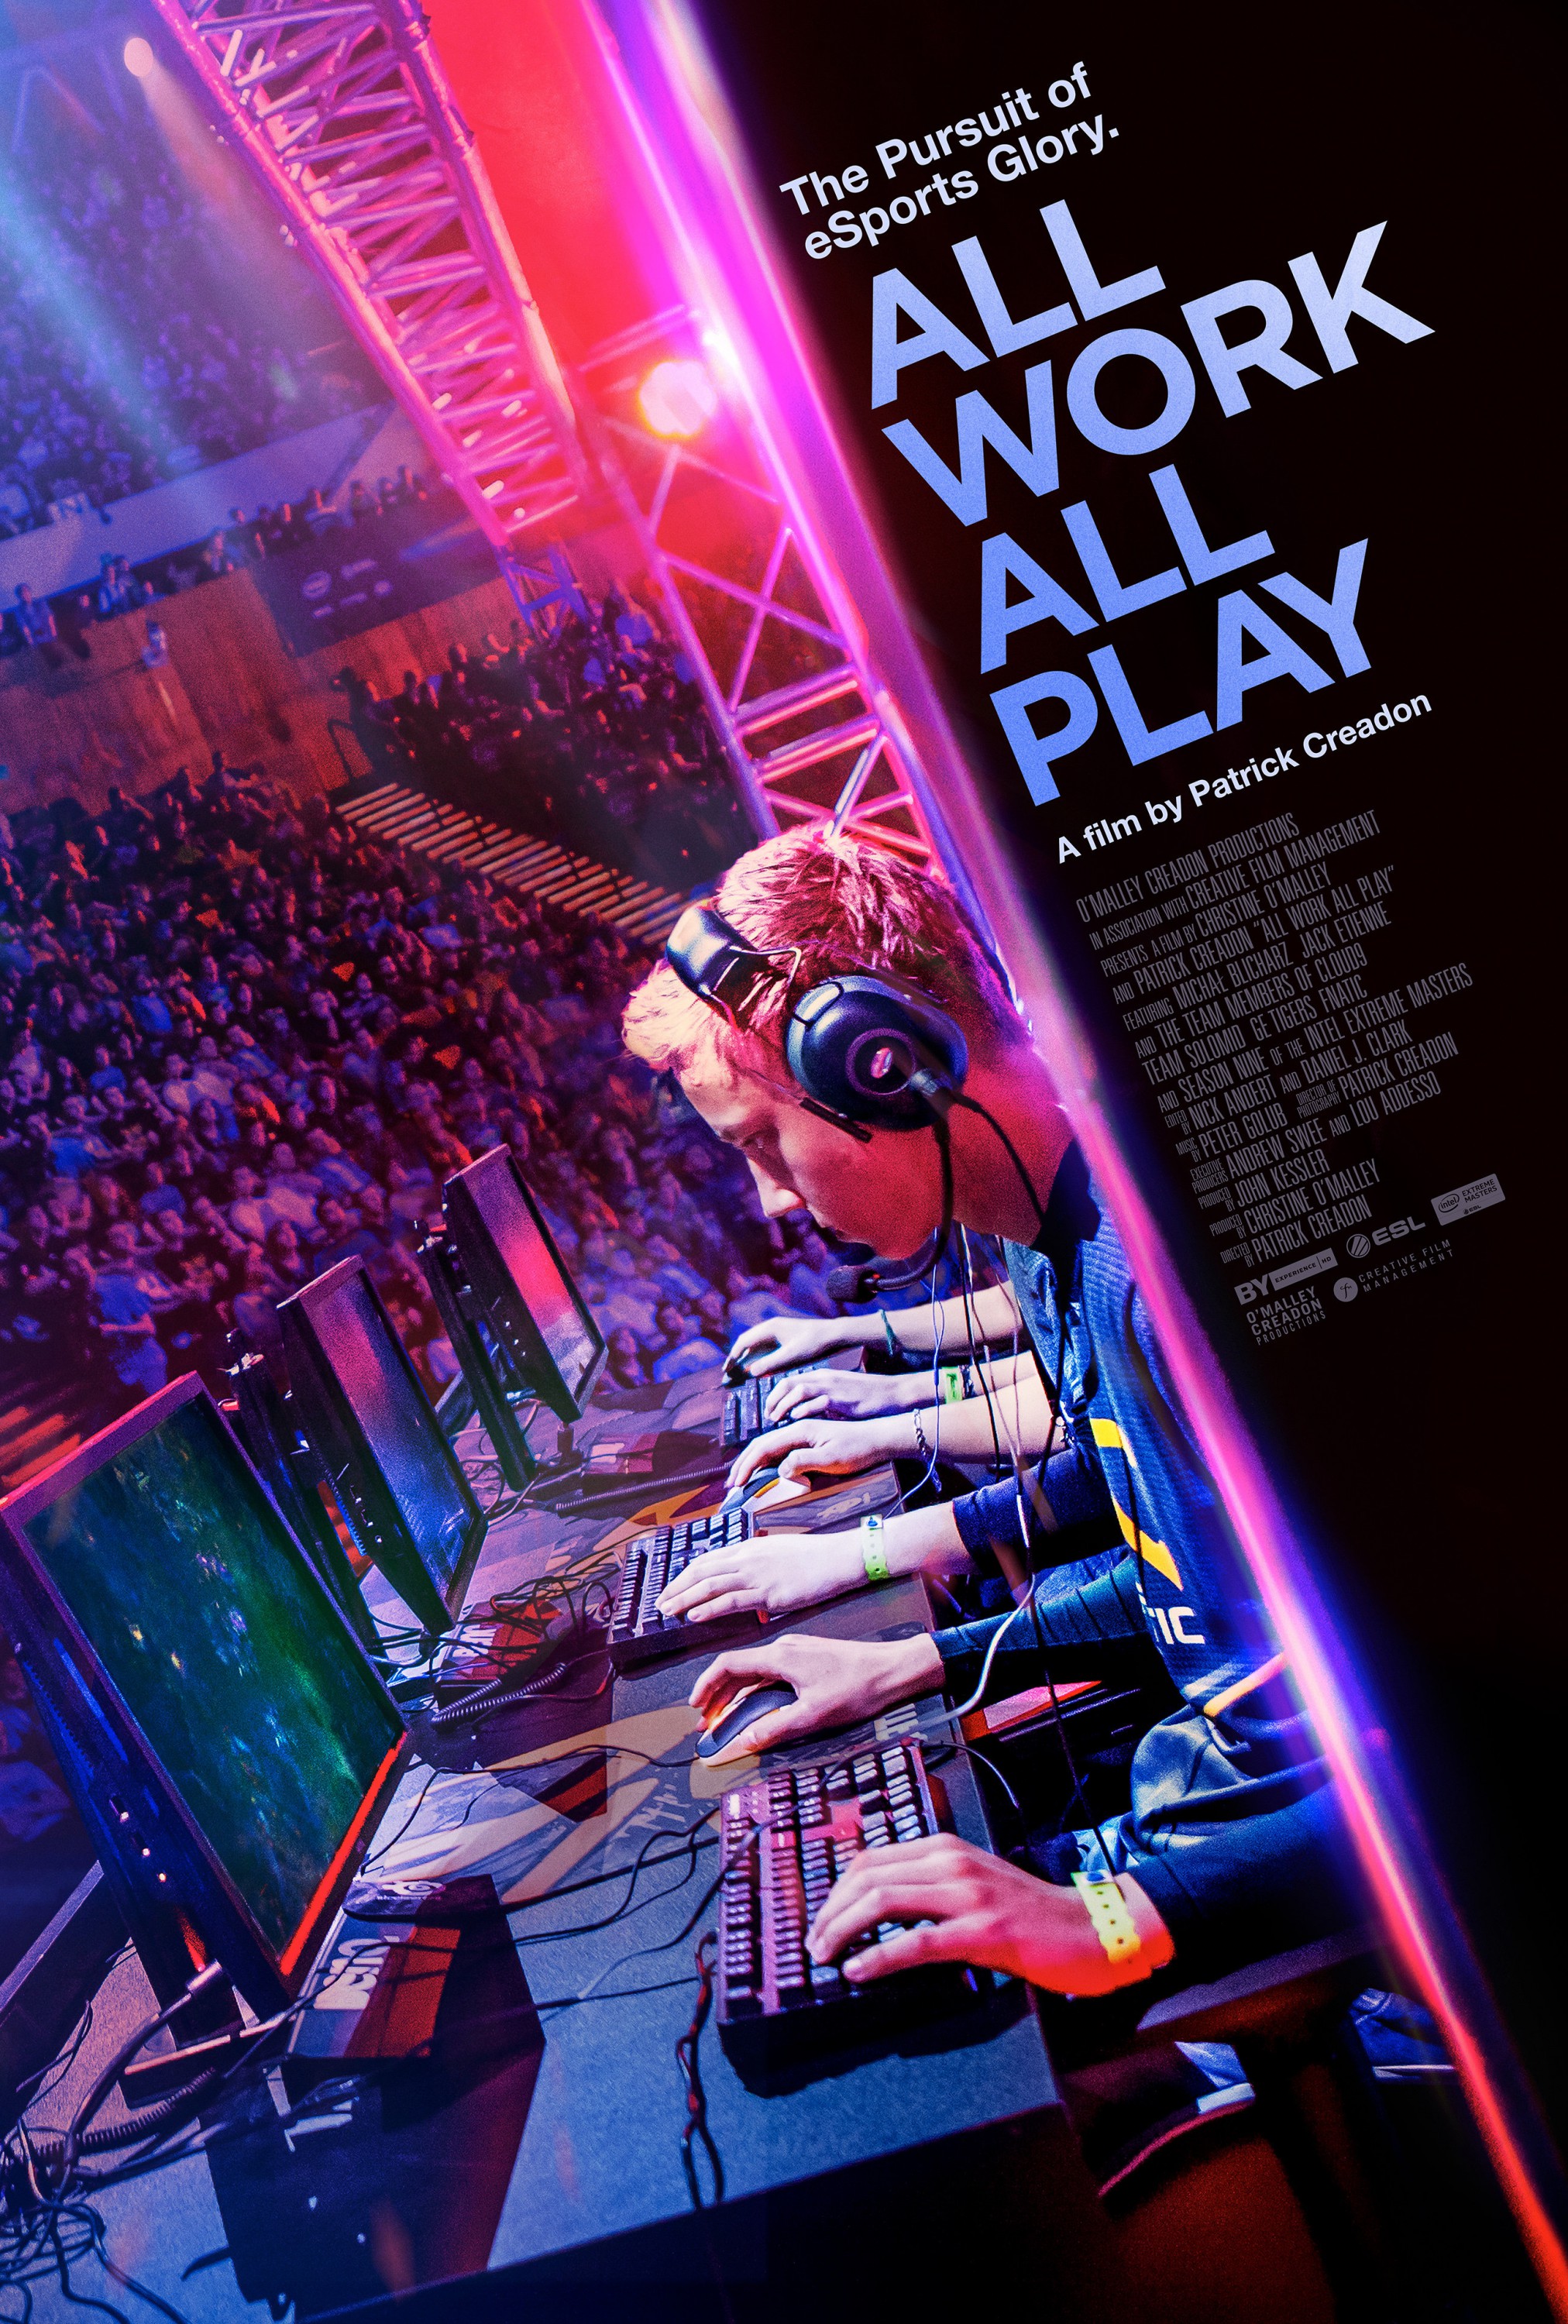 Mega Sized Movie Poster Image for All Work All Play 